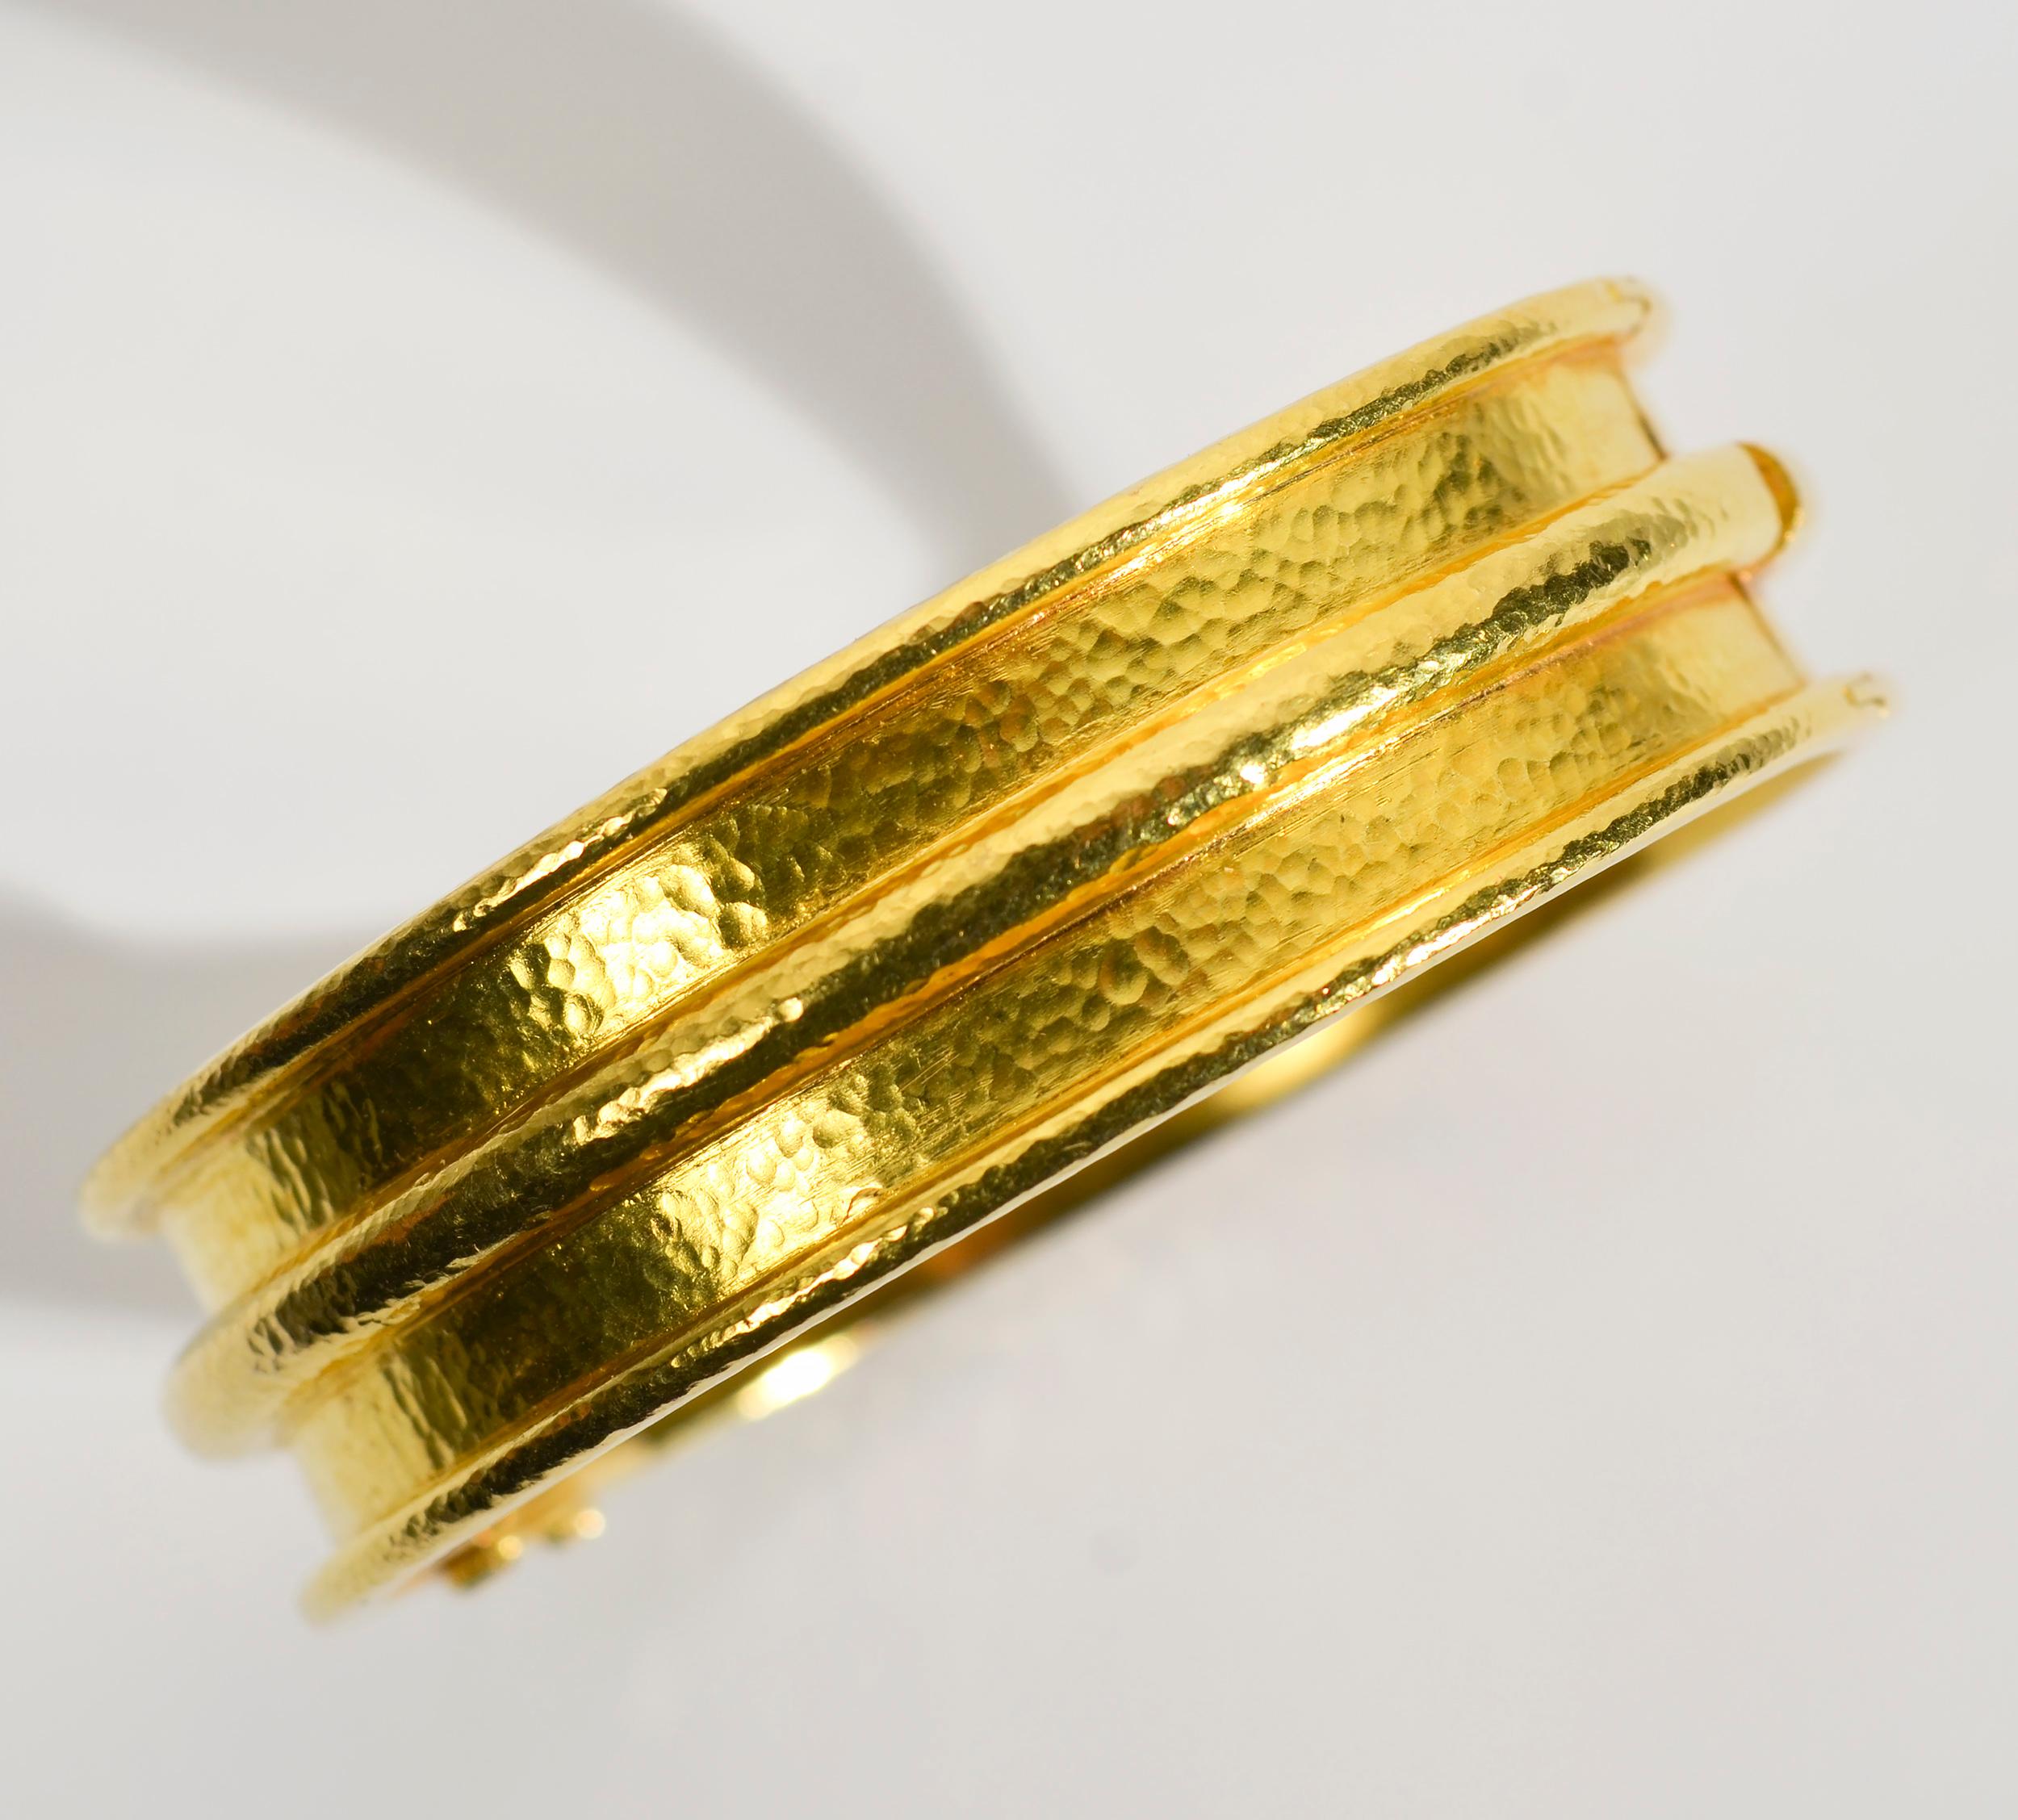 Elizabeth Locke hinged bangle bracelet in her classic hammered gold finish. The bracelet has raised channel ends and middle.
The bracelet is 2 1/4 inches in diameter and 5/8 inches in height. It is in unworn condition.
Sold with Elizabeth Locke